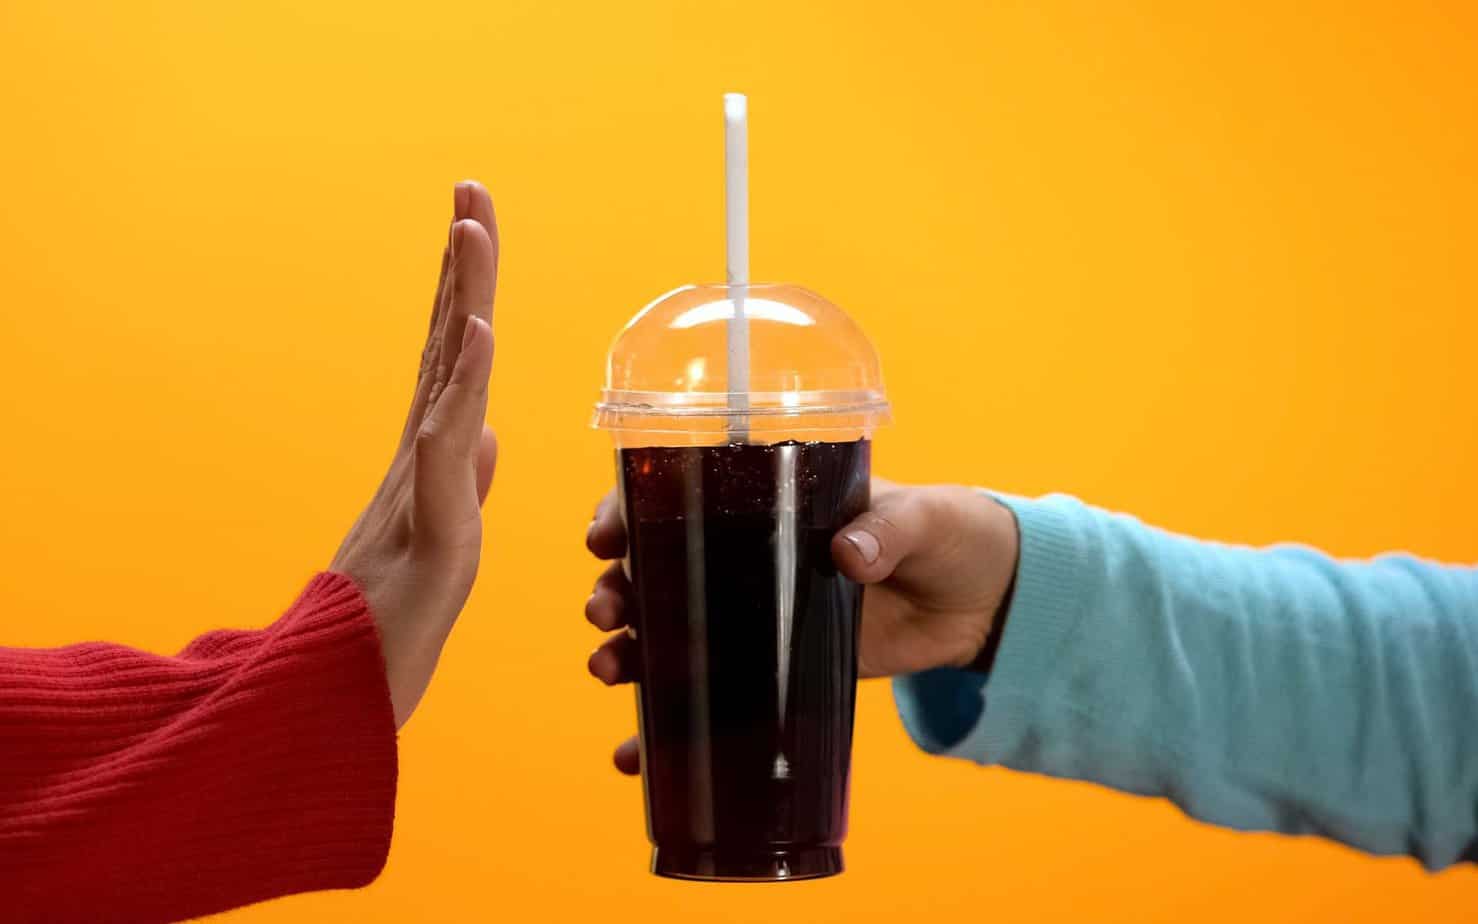 Scientists Studied Impact Of Sugary Drinks On Health, And The News Isn't Good